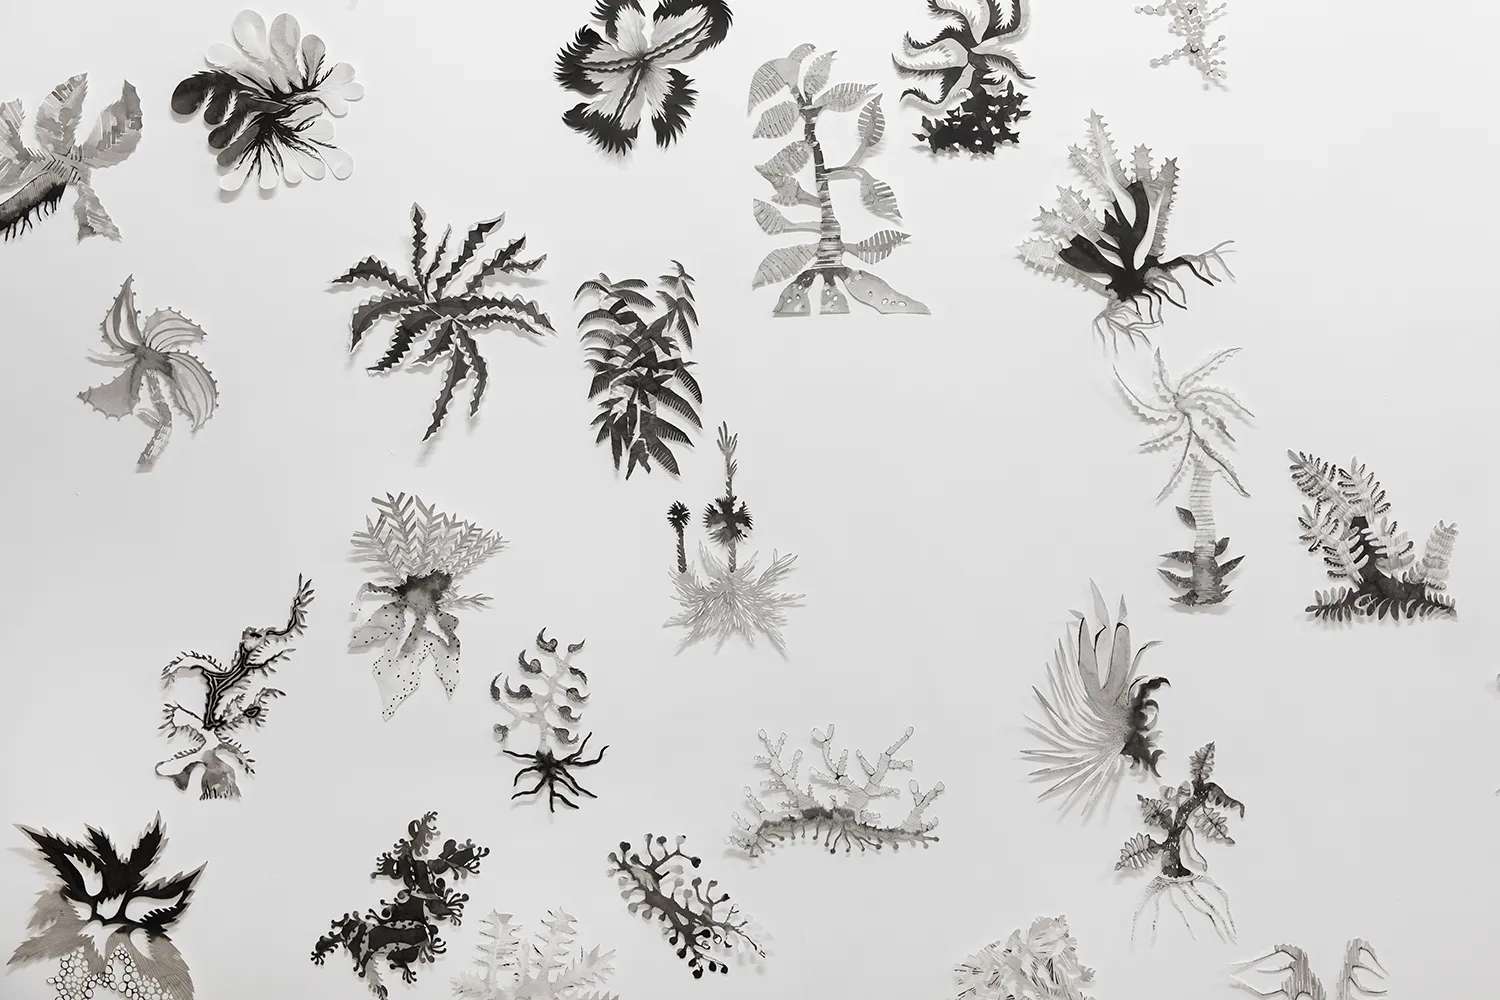 close up on intricate imaginary plants forms on paper